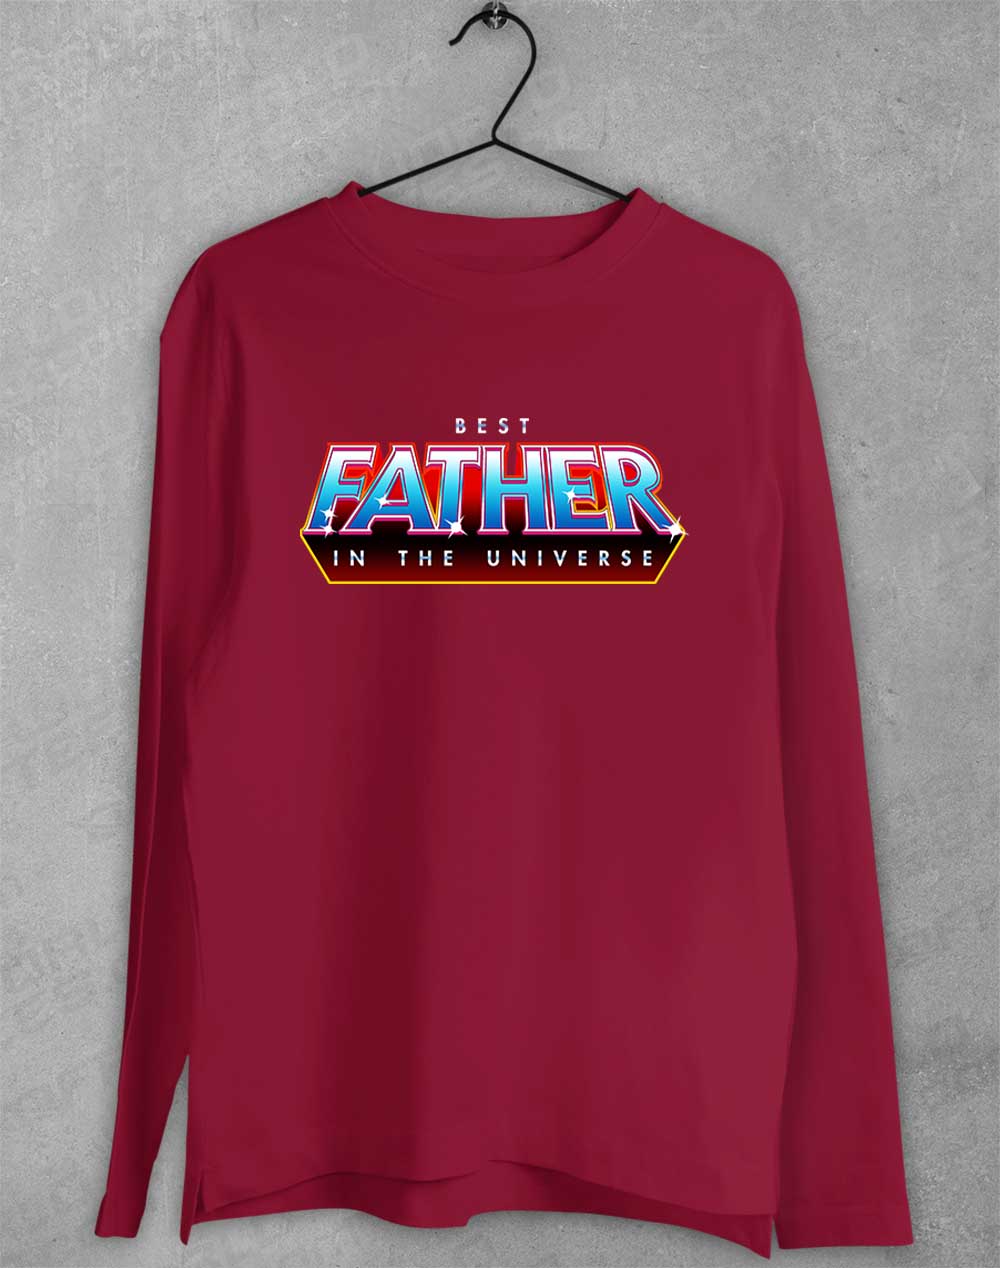 Cardinal Red - Best Father in the Universe Long Sleeve T-Shirt